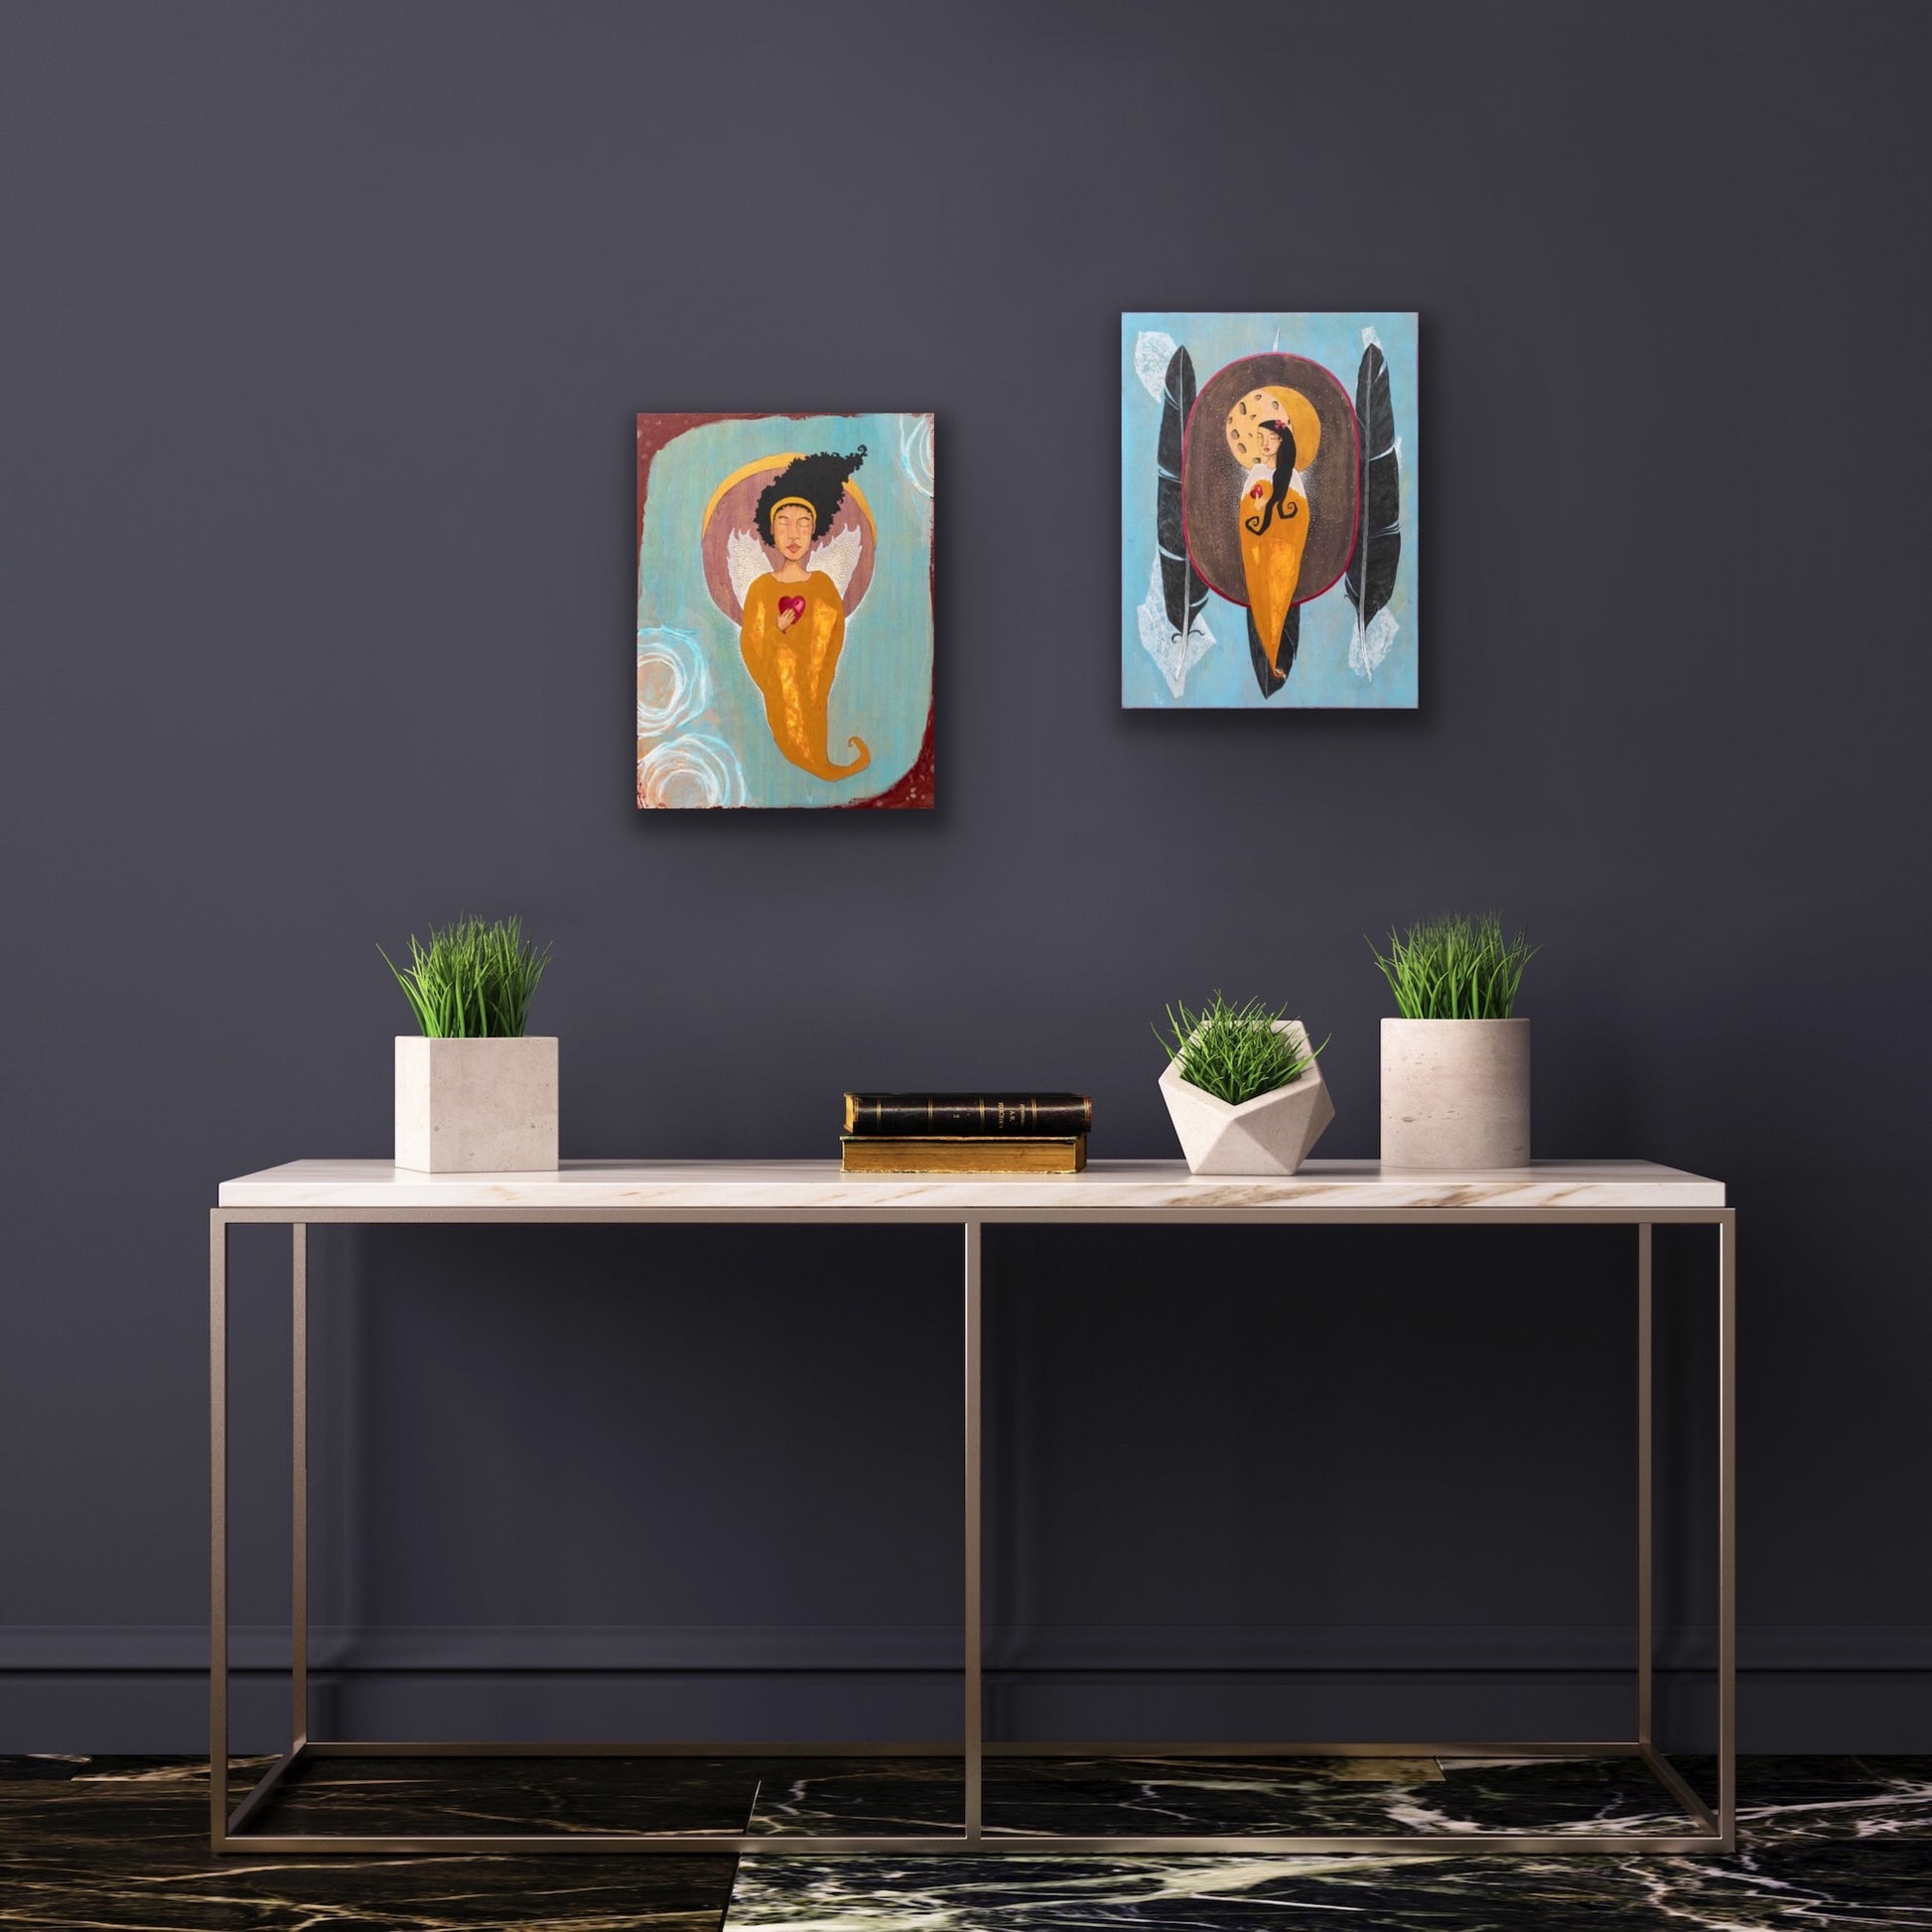 Two small paintings of female figures with hearts in their hands.  The paintings are hanging on a gray wall above a white table with cement planters and books.